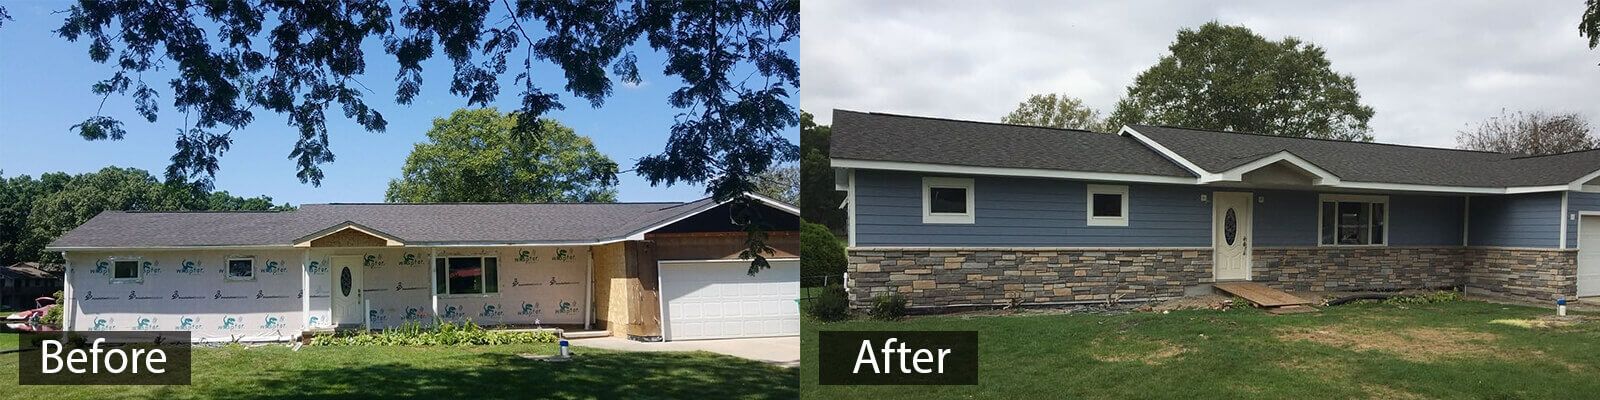 Gowan before and after - South Bend, IN - A&M Home Services